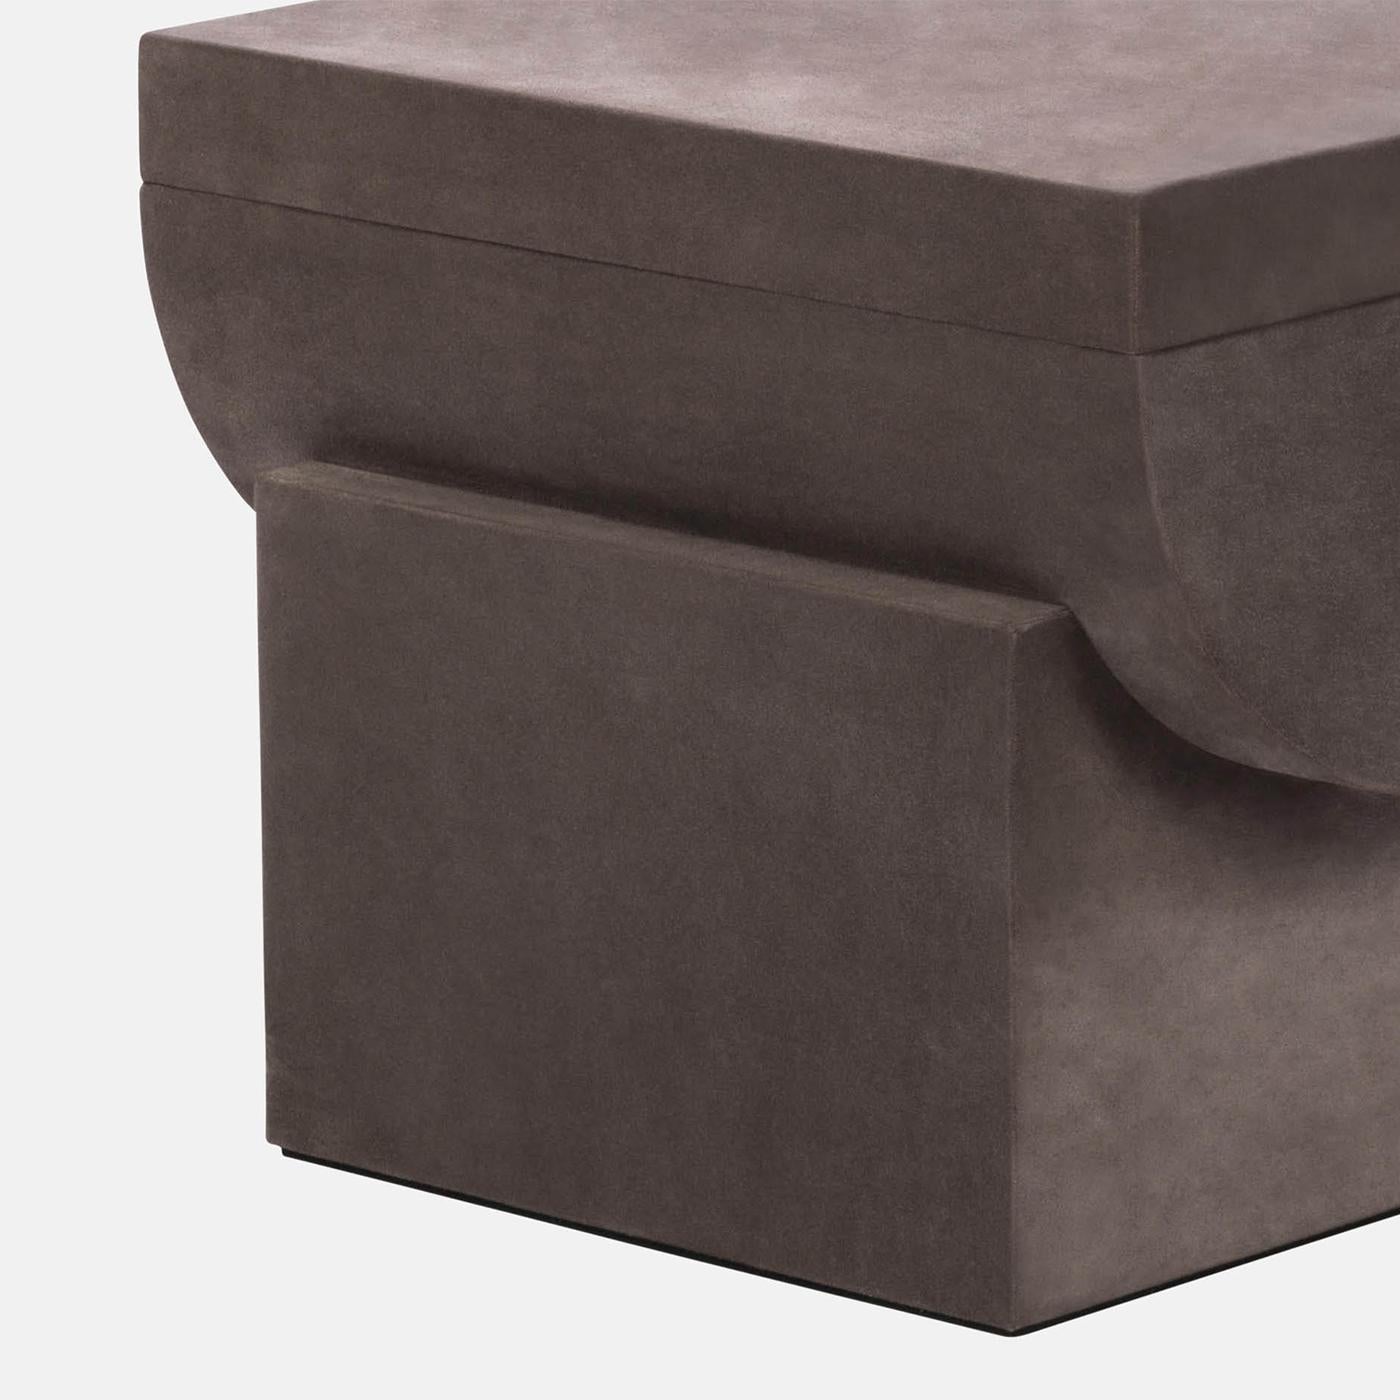 Stool Pherson with solid wood structure, 
covered with deep grey Italian suede leather.
Also available in other suede colors on request.